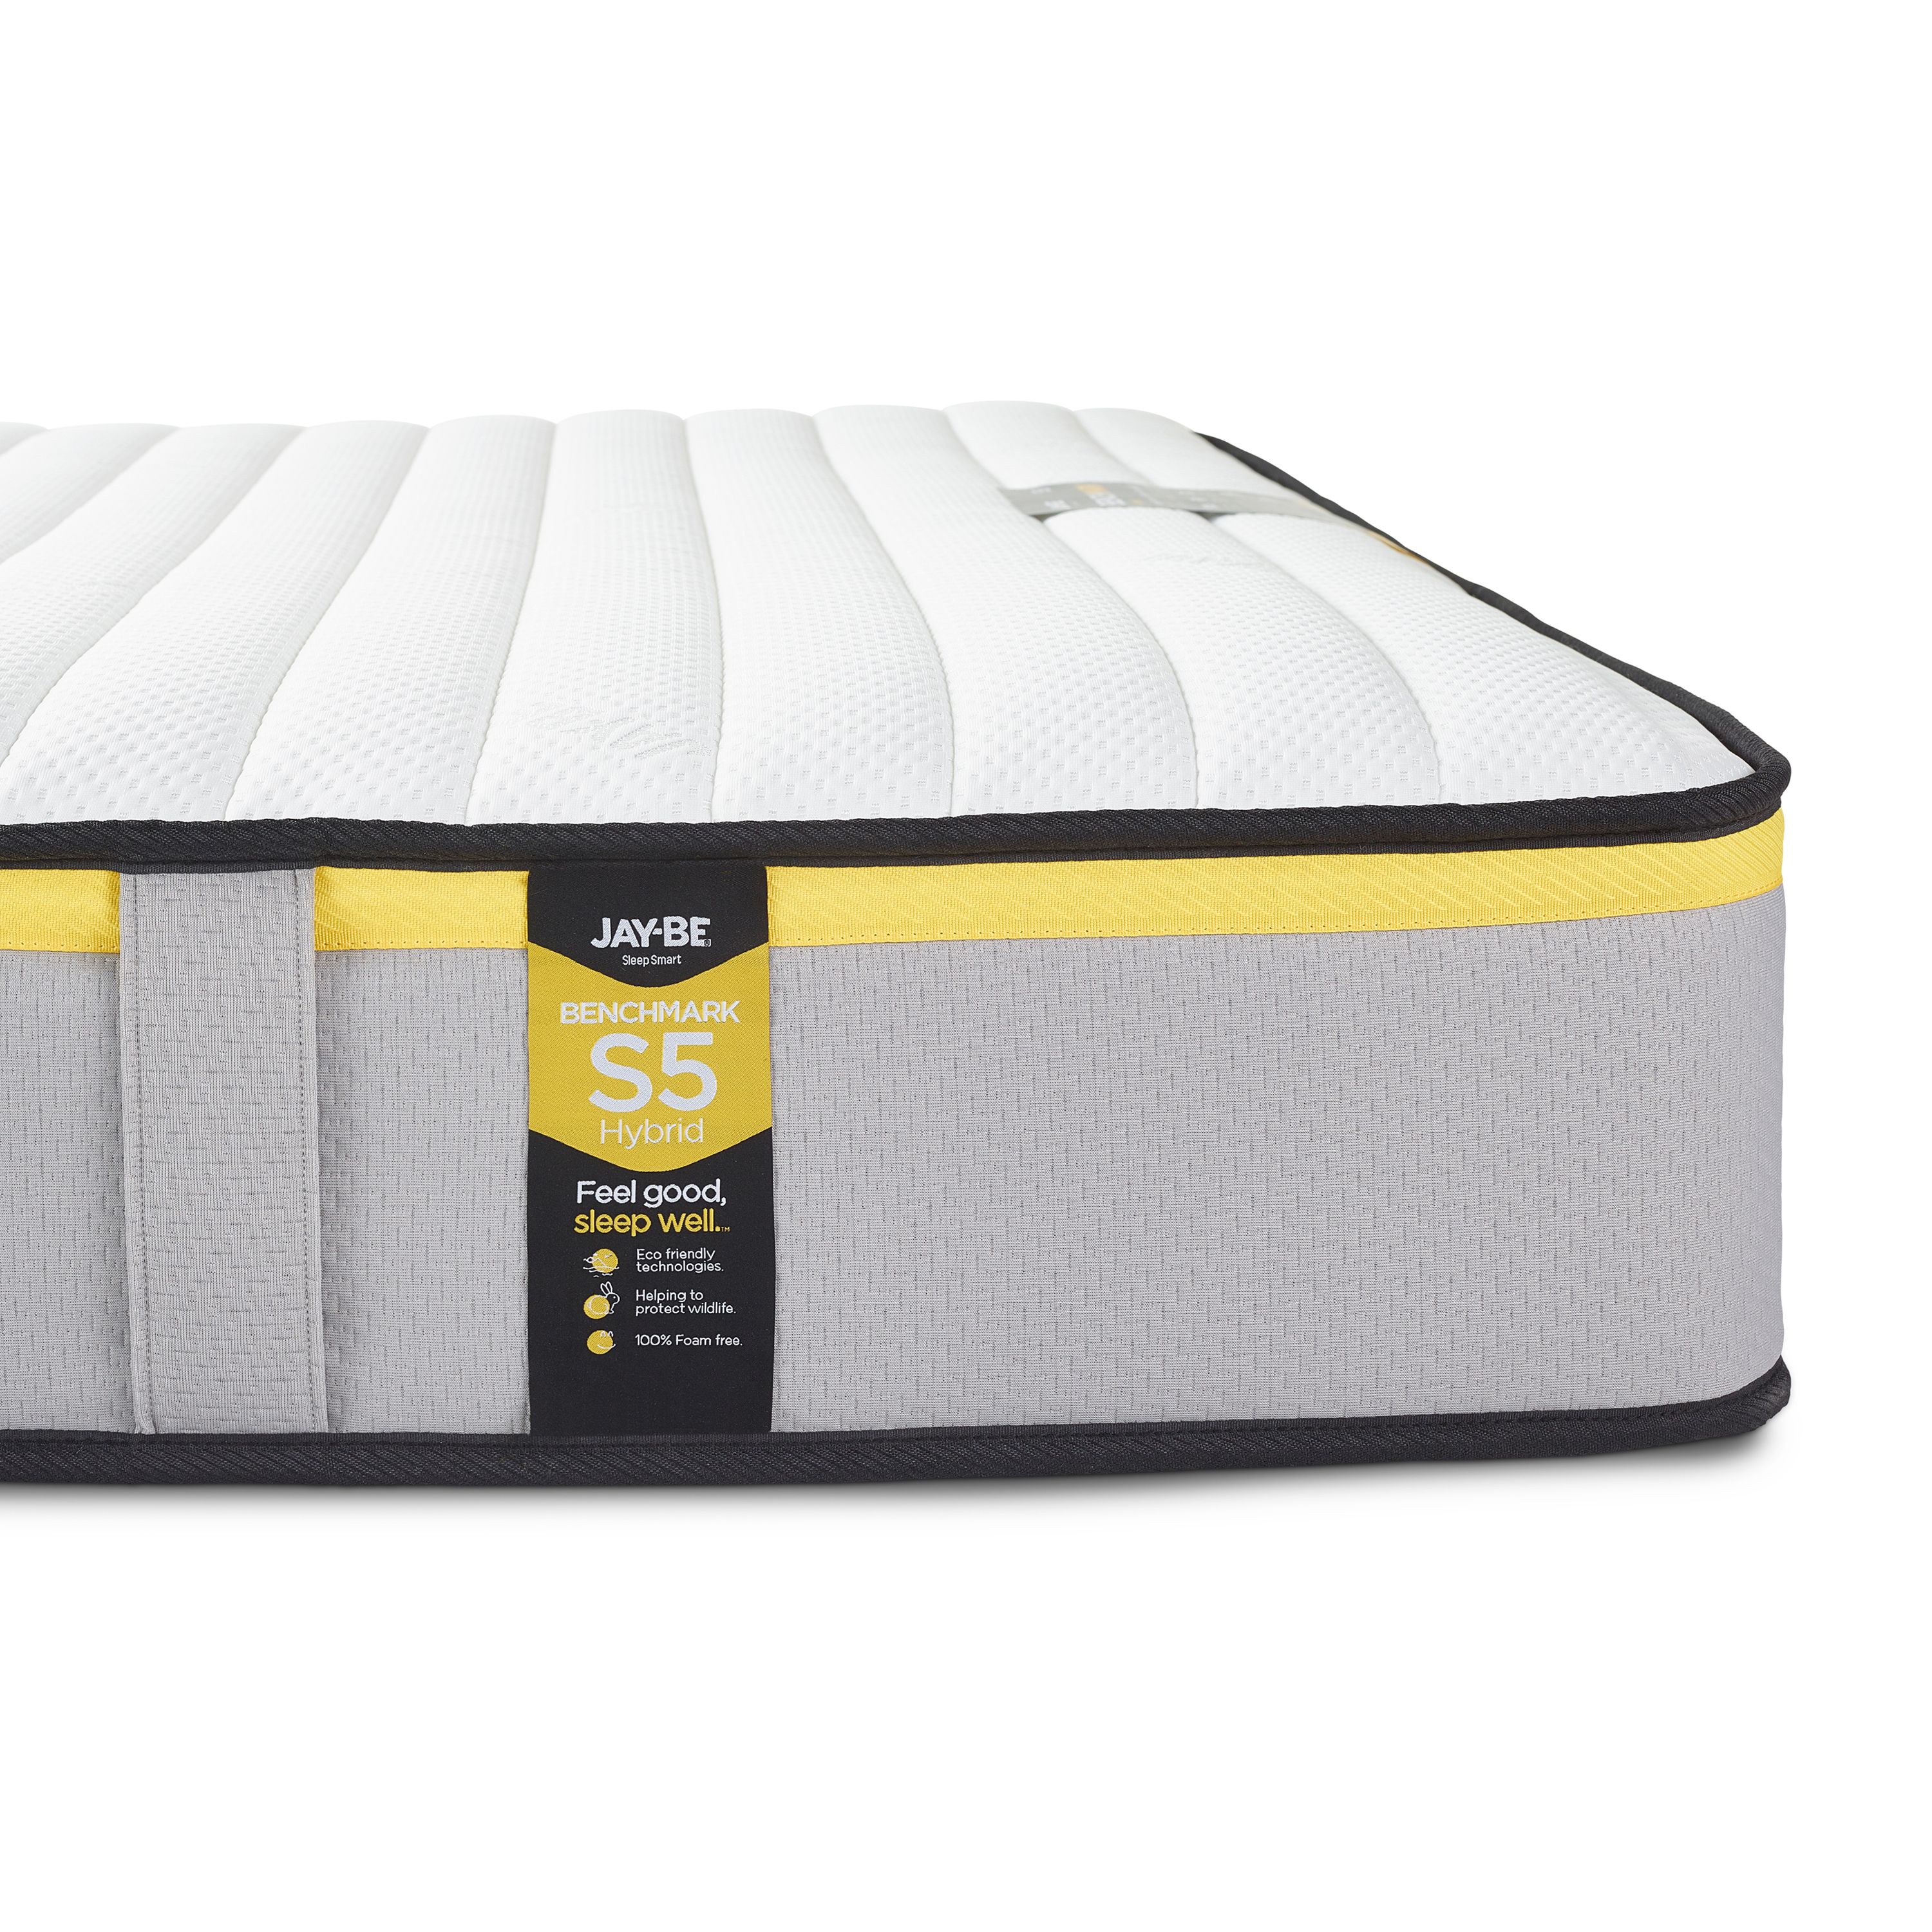 Jay-Be Benchmark S5 Hybrid Eco Friendly Open coil Water resistant Small double Mattress